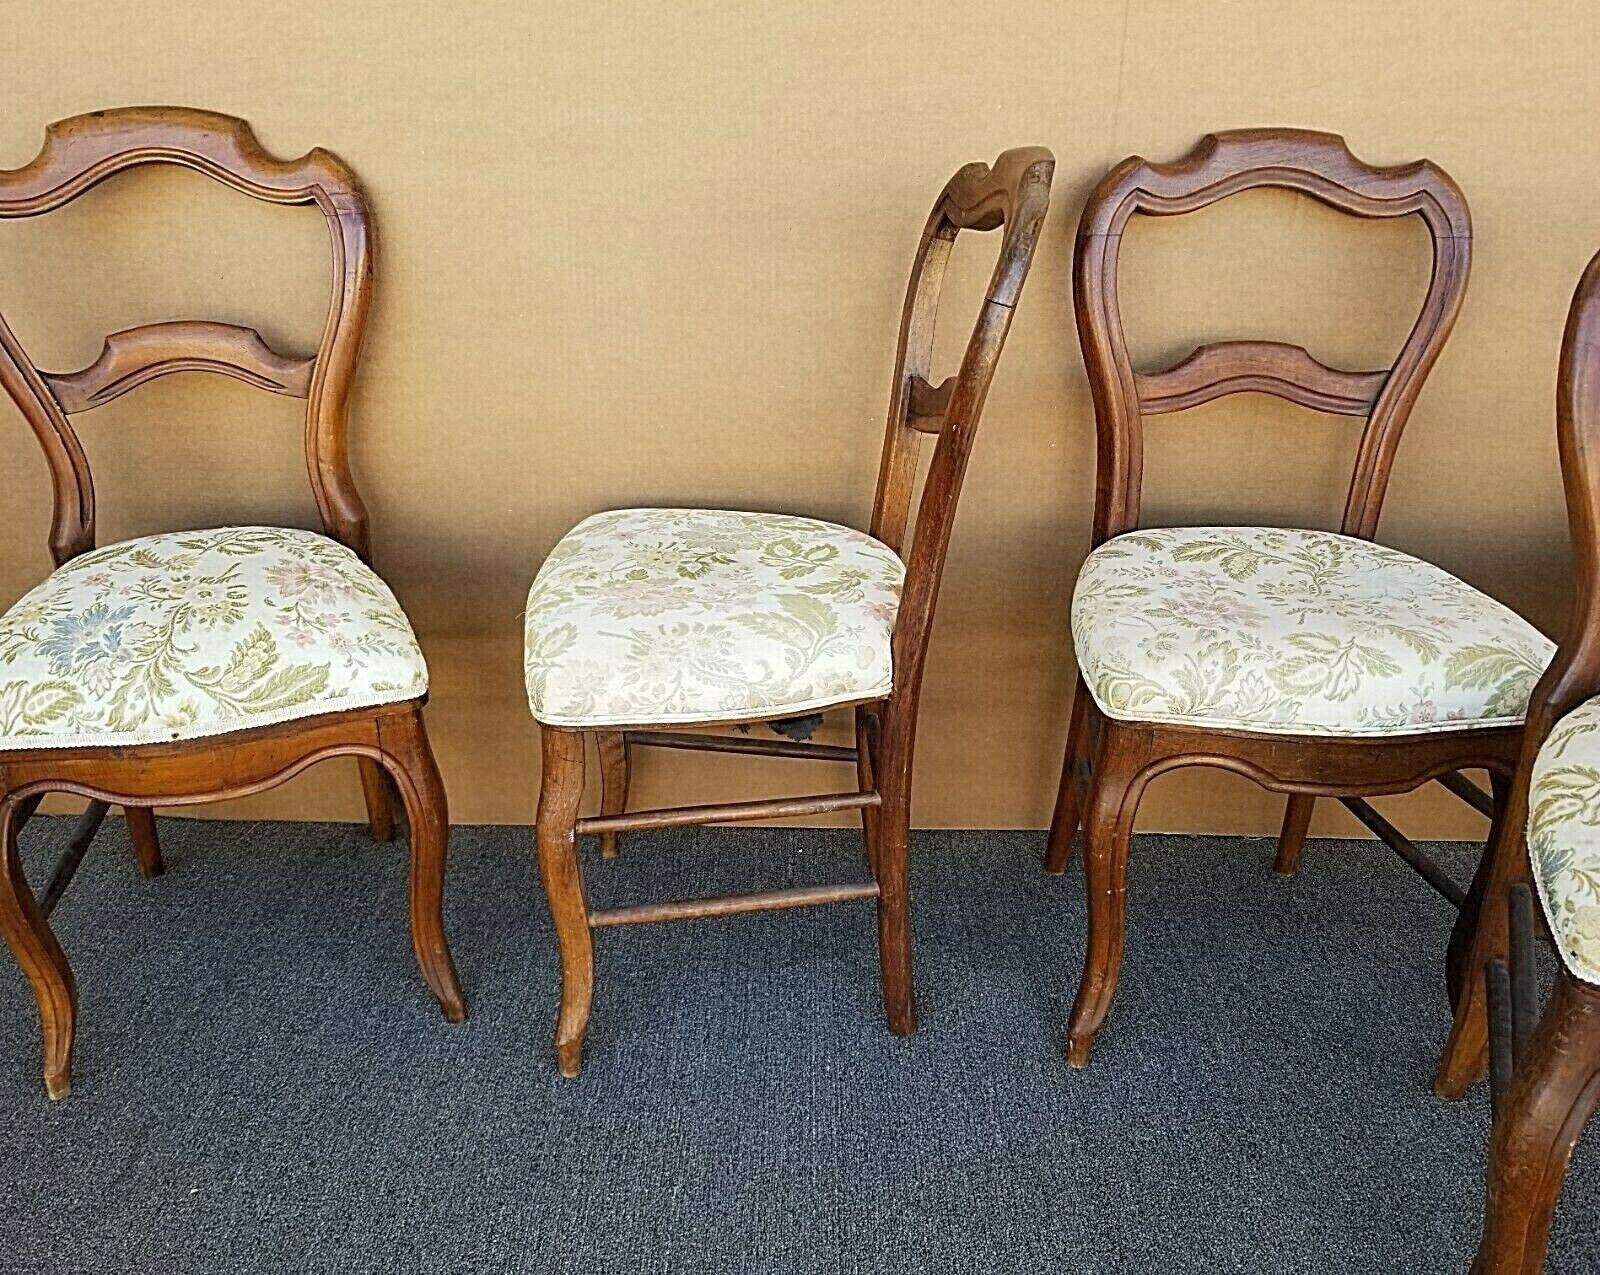 20th Century Antique Victorian Balloon Back Chairs, Set of 7 For Sale